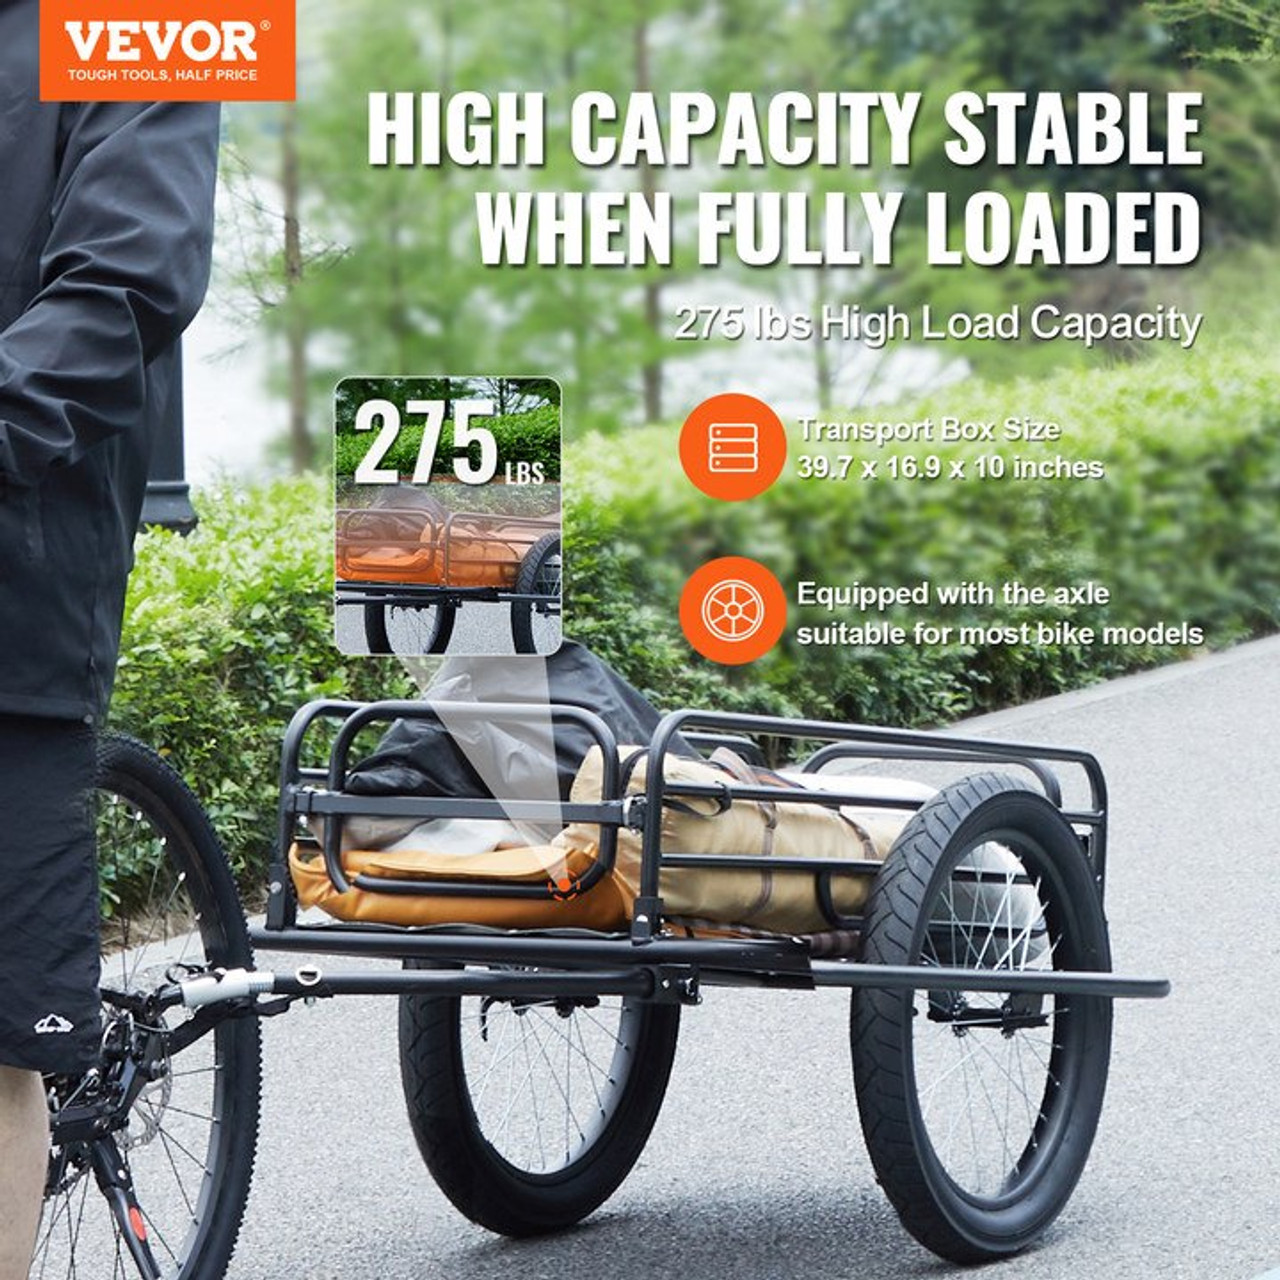 VEVOR Bike Cargo Trailer, 275 lbs Load Capacity, Heavy-Duty Bicycle Wagon Cart, Foldable Compact Storage & Quick Release with Universal Hitch, 20" Wheels, Fits Most Bike Wheels, Carbon Steel Frame